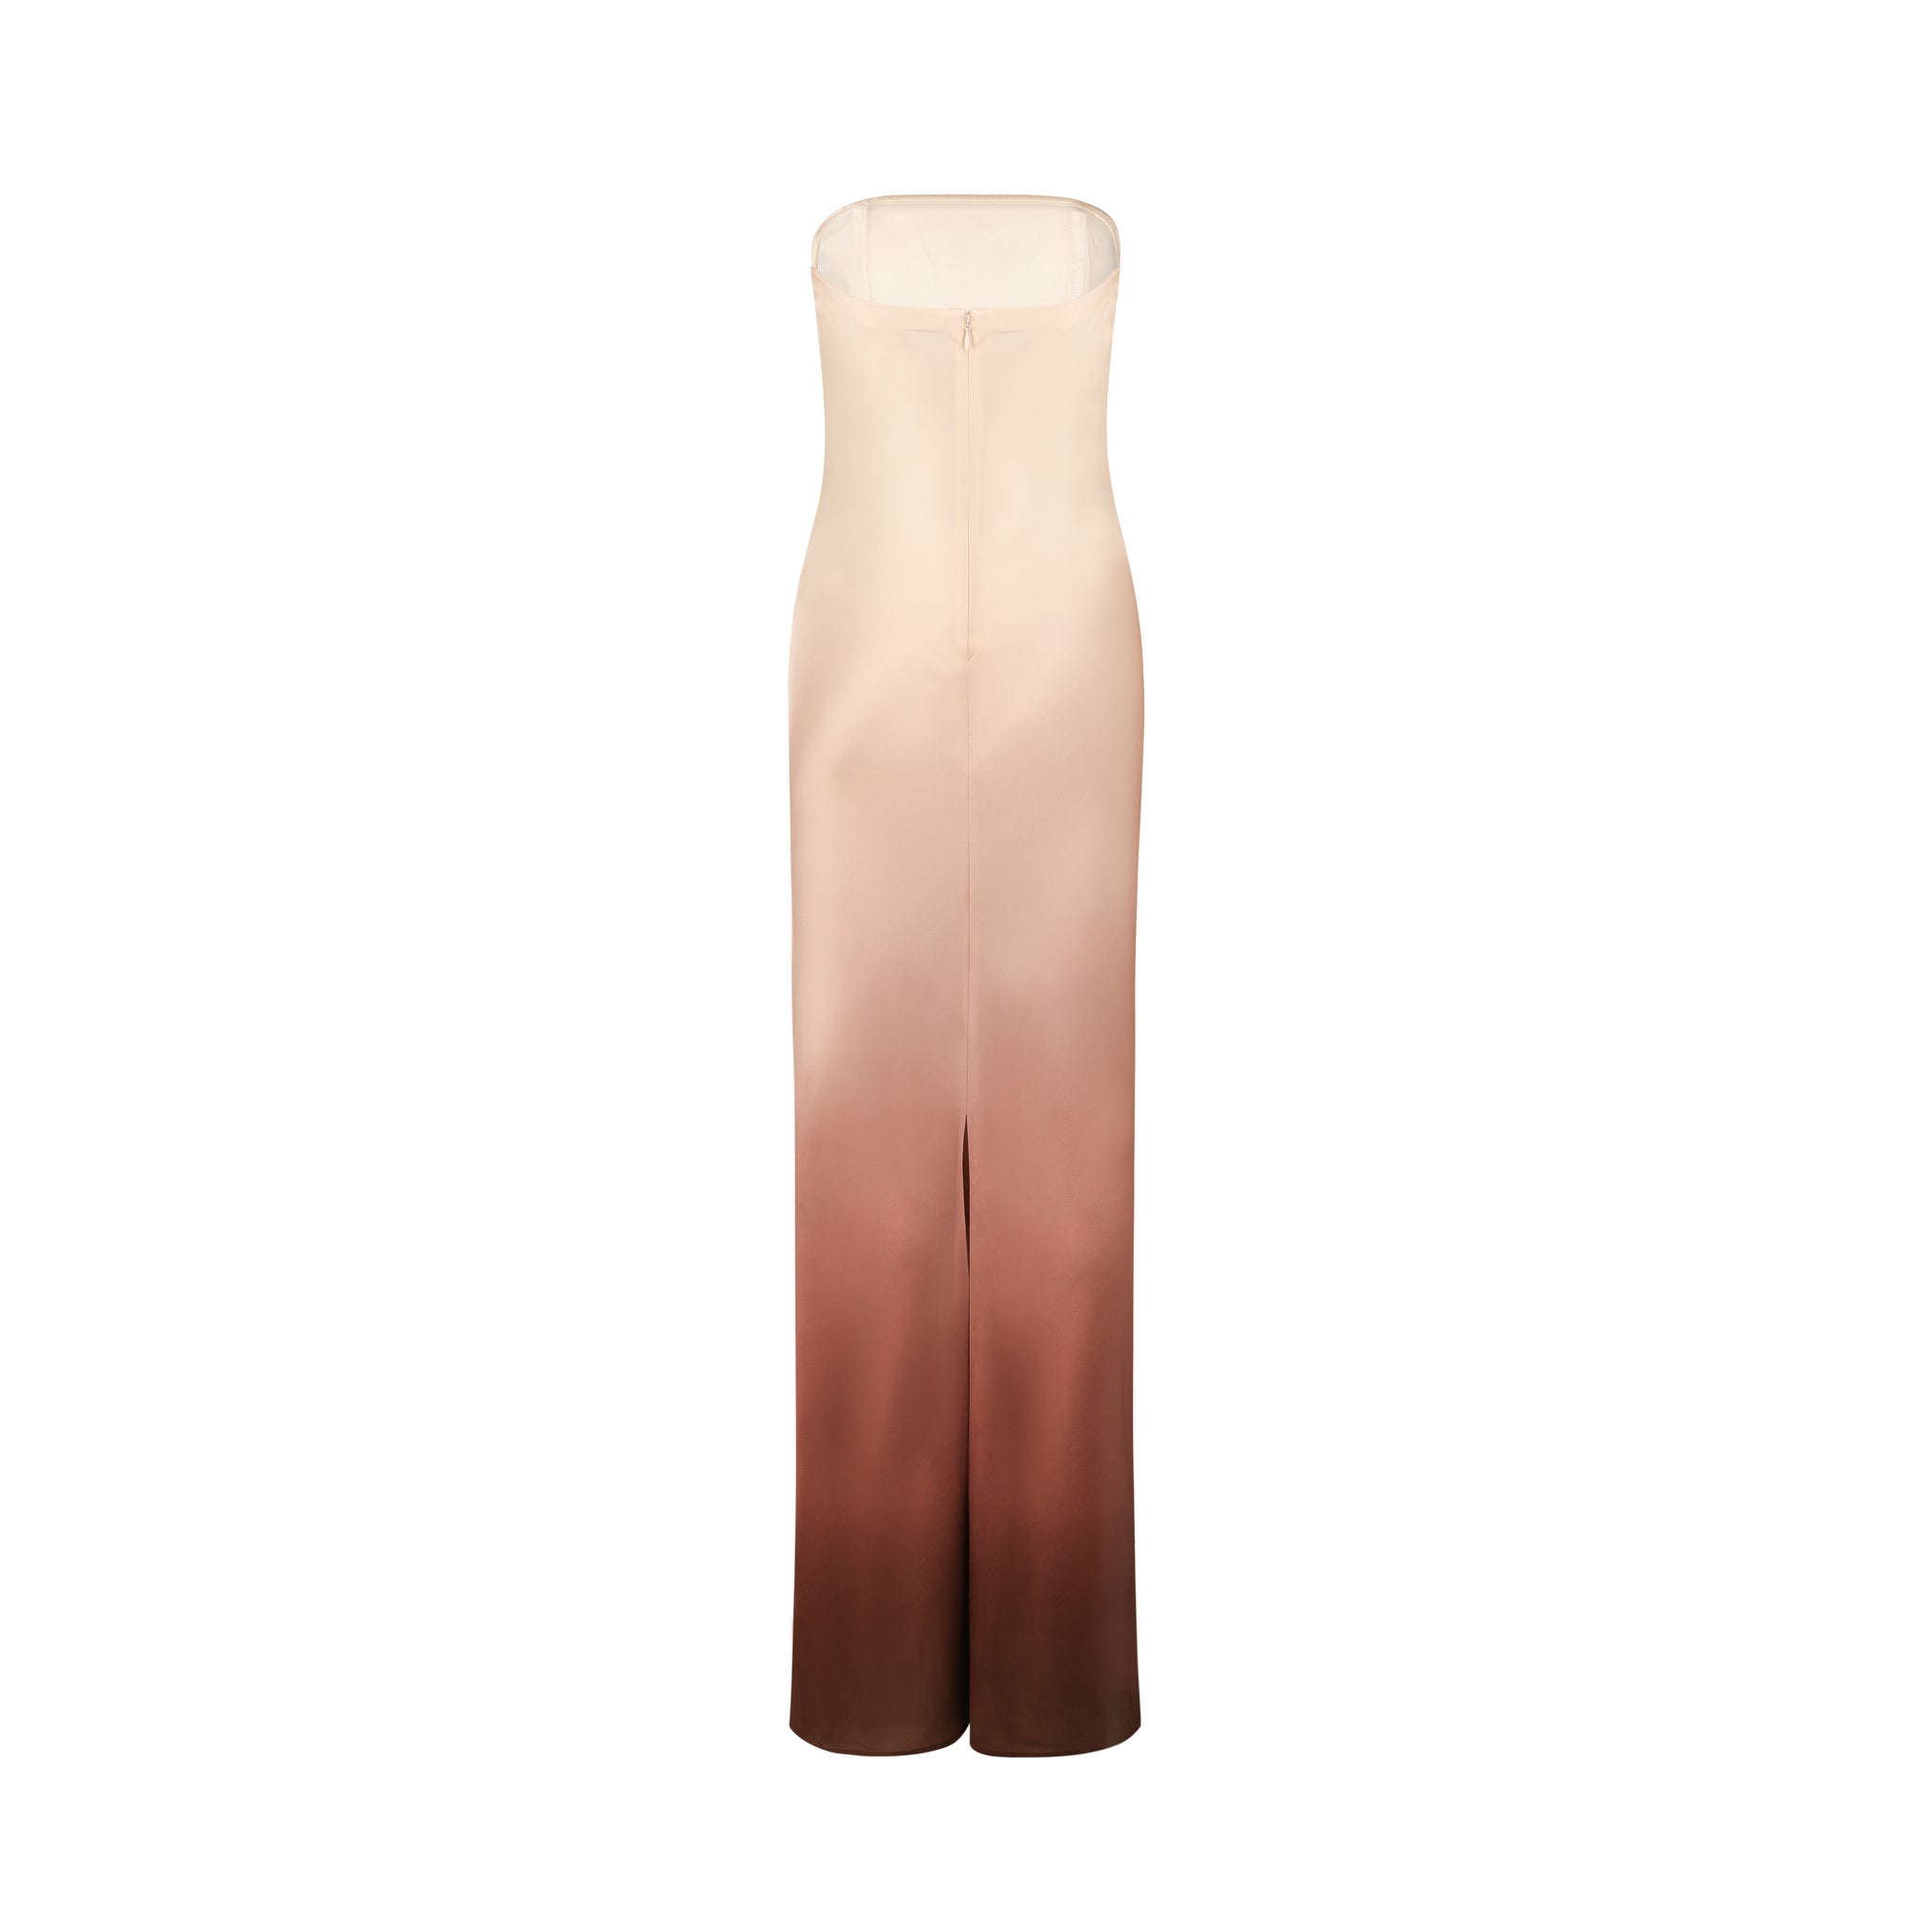 Solene Dress - Cream and Brown Ombre